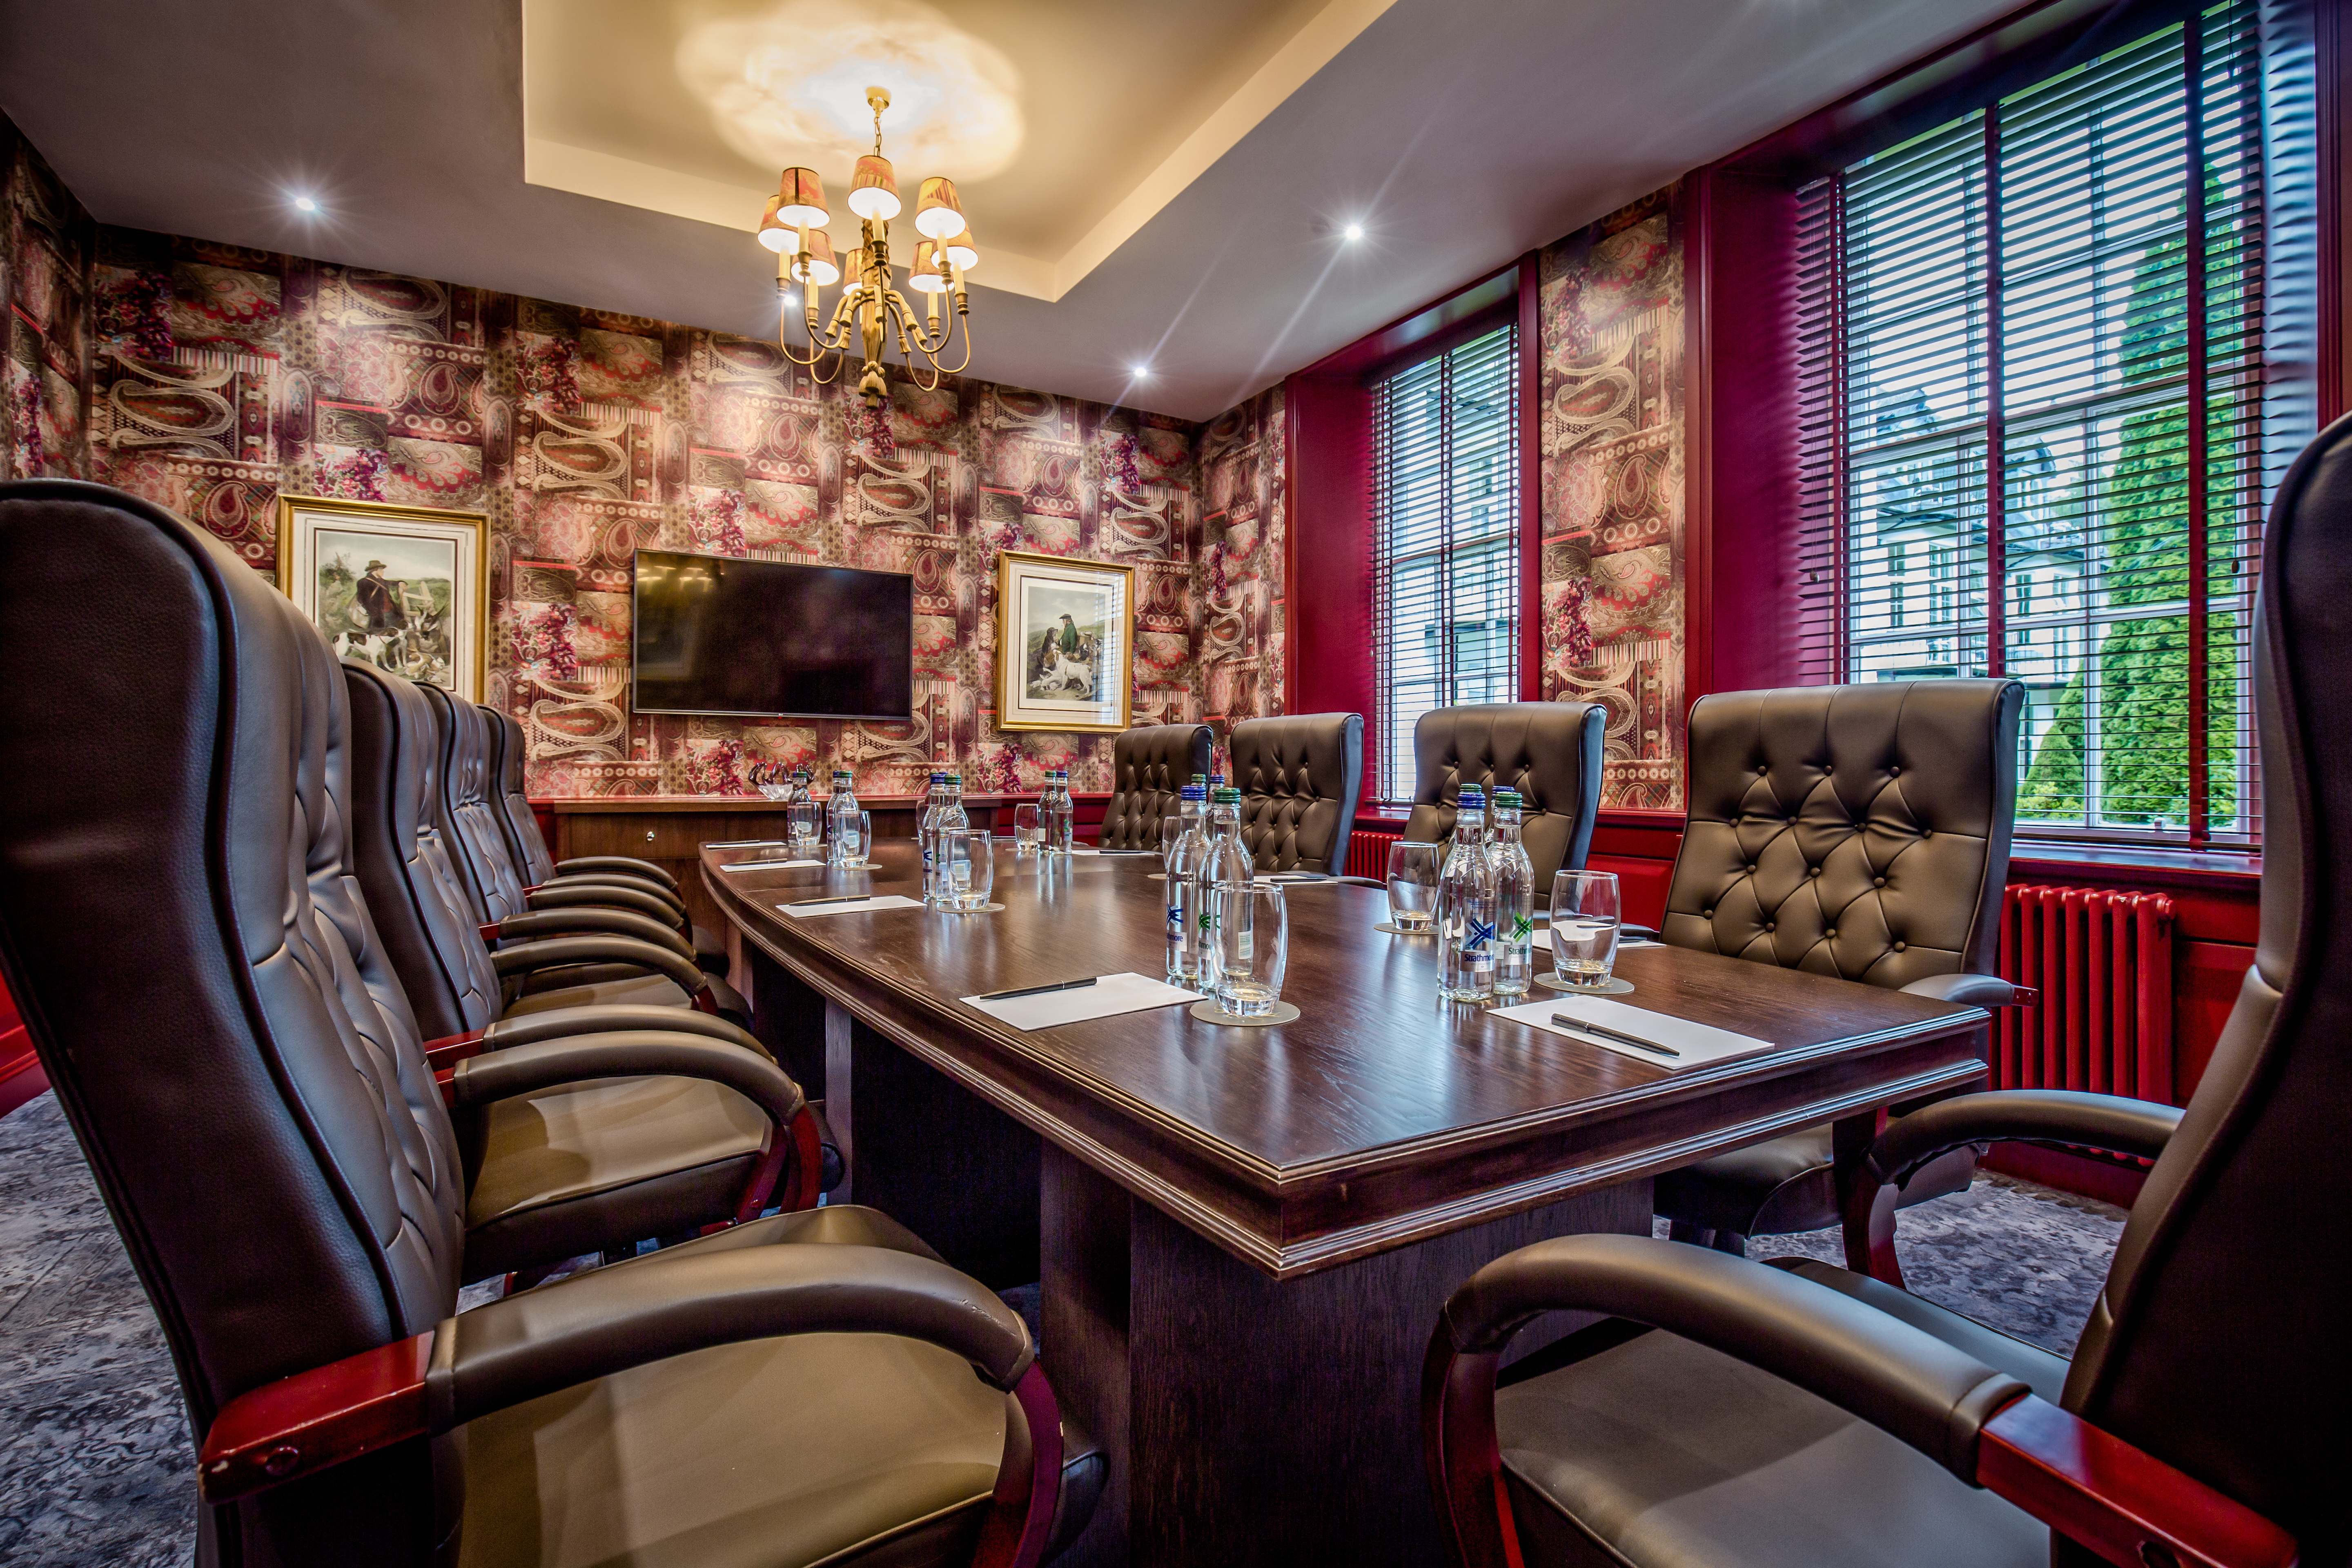 The boardroom at Dunkeld House Hotel